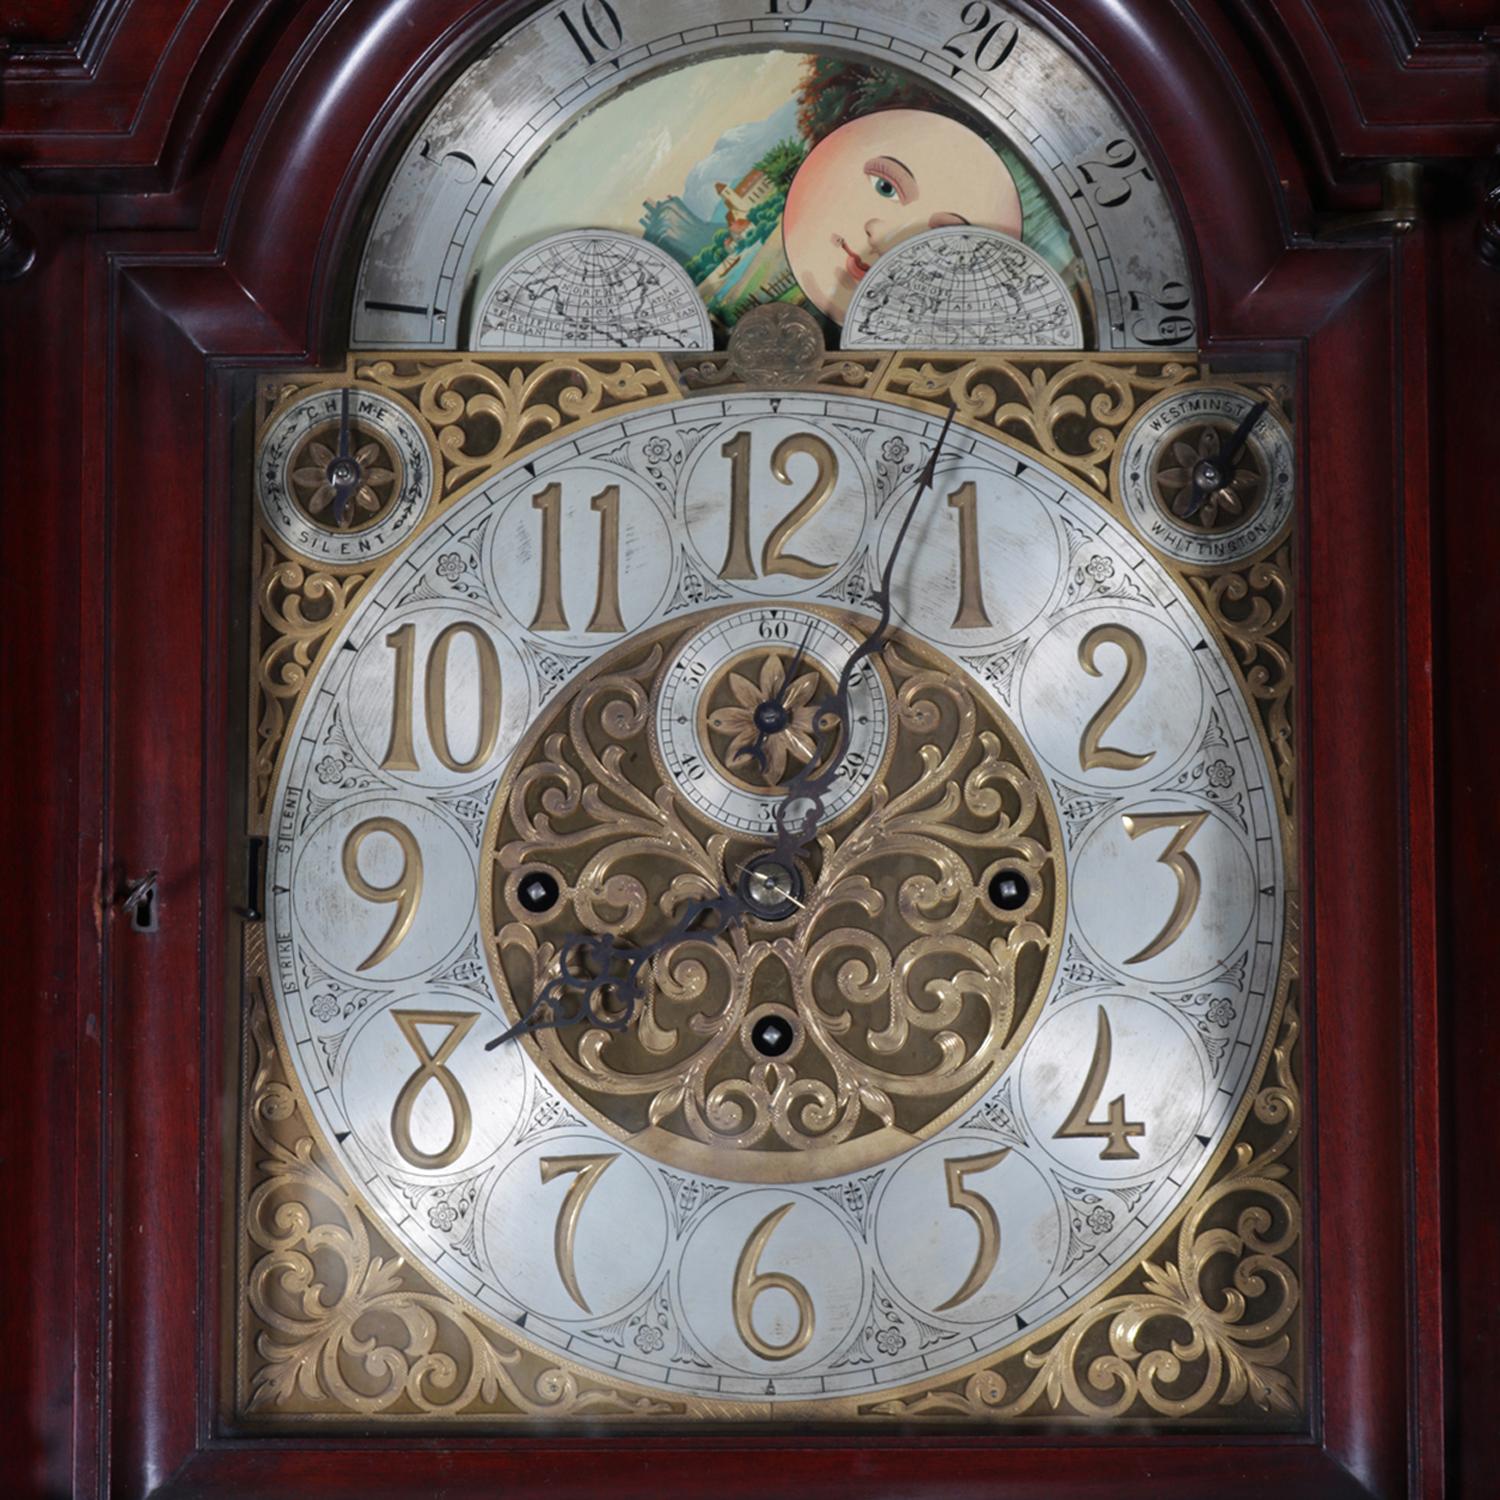 An antique long case clock by Herschede features carved mahogany case, reticulated moon phase face with Arabic numerals, works are German, without serial number (pre-dating 1911), and not working full time (possibly in need of cleaning), 9-tube and